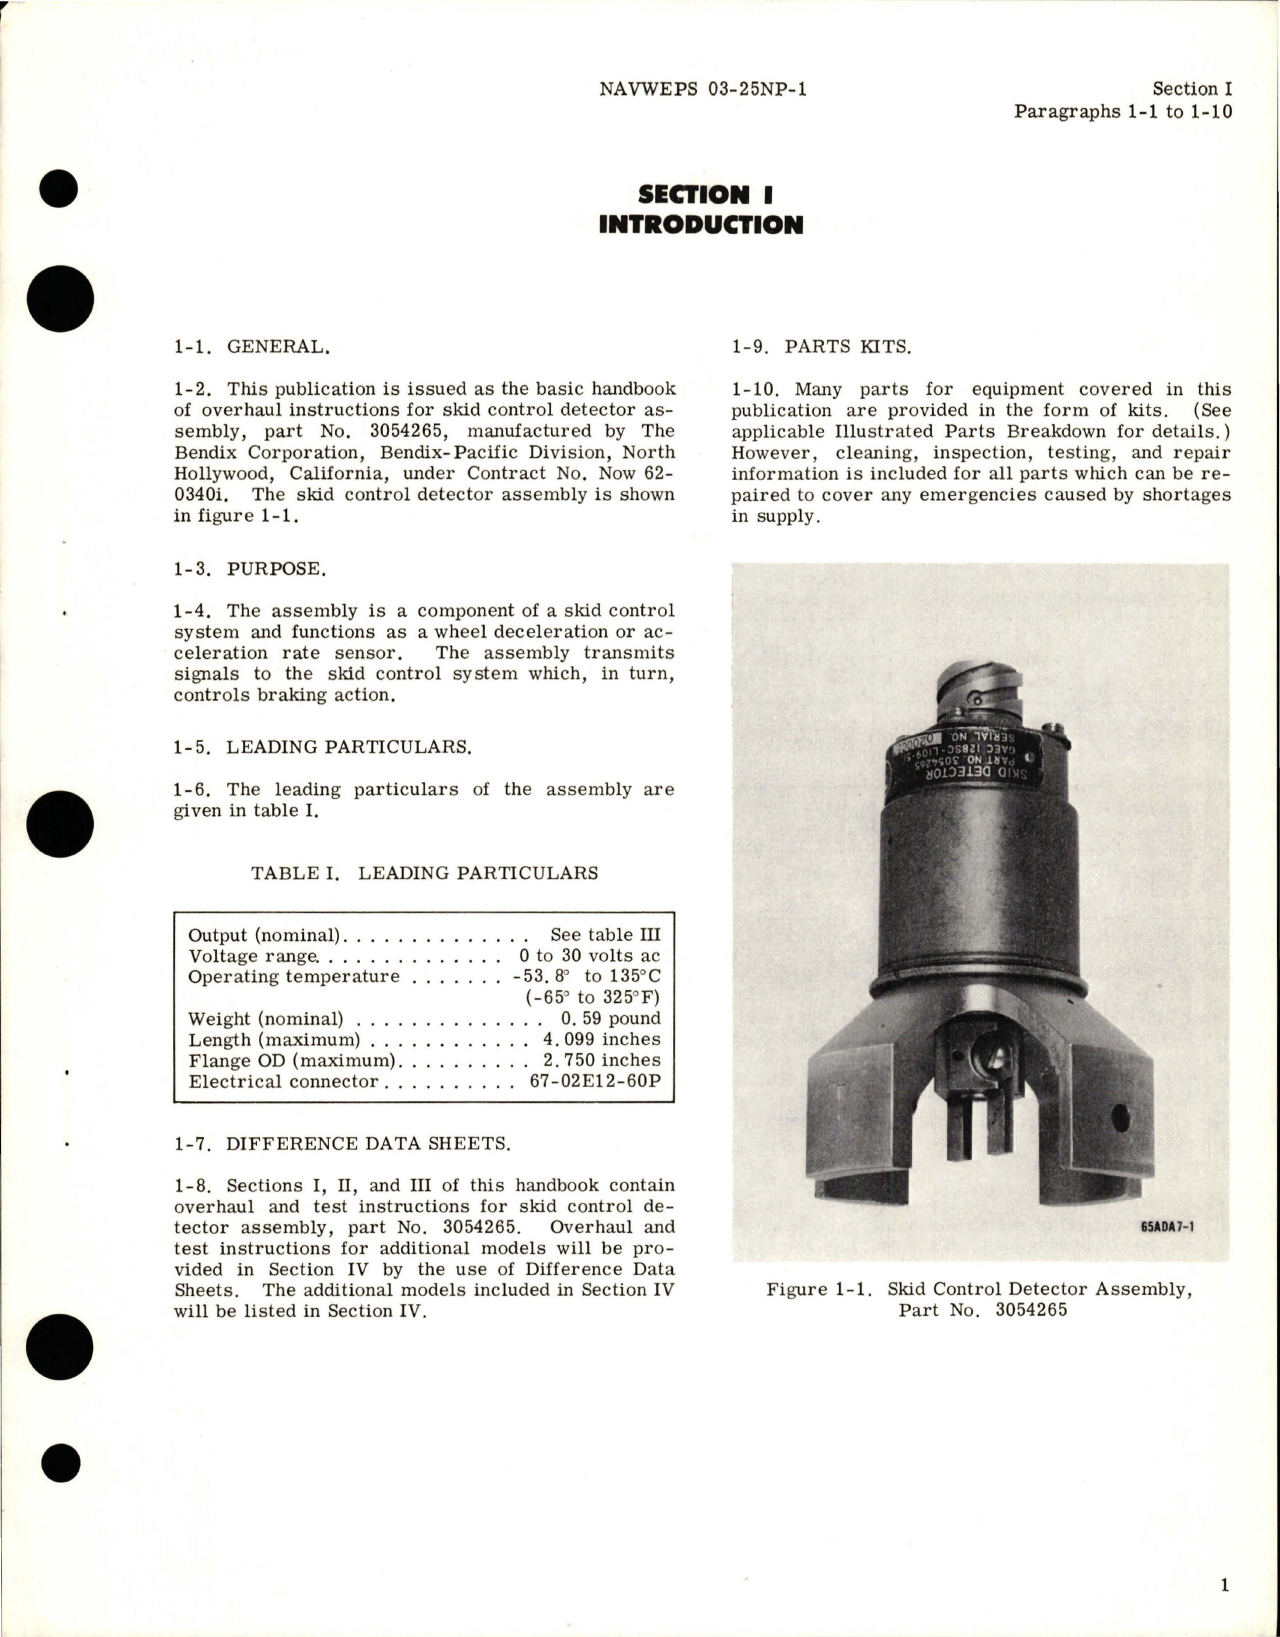 Sample page 5 from AirCorps Library document: Overhaul Instructions for Skid Control Detector Assembly - Part 3054265